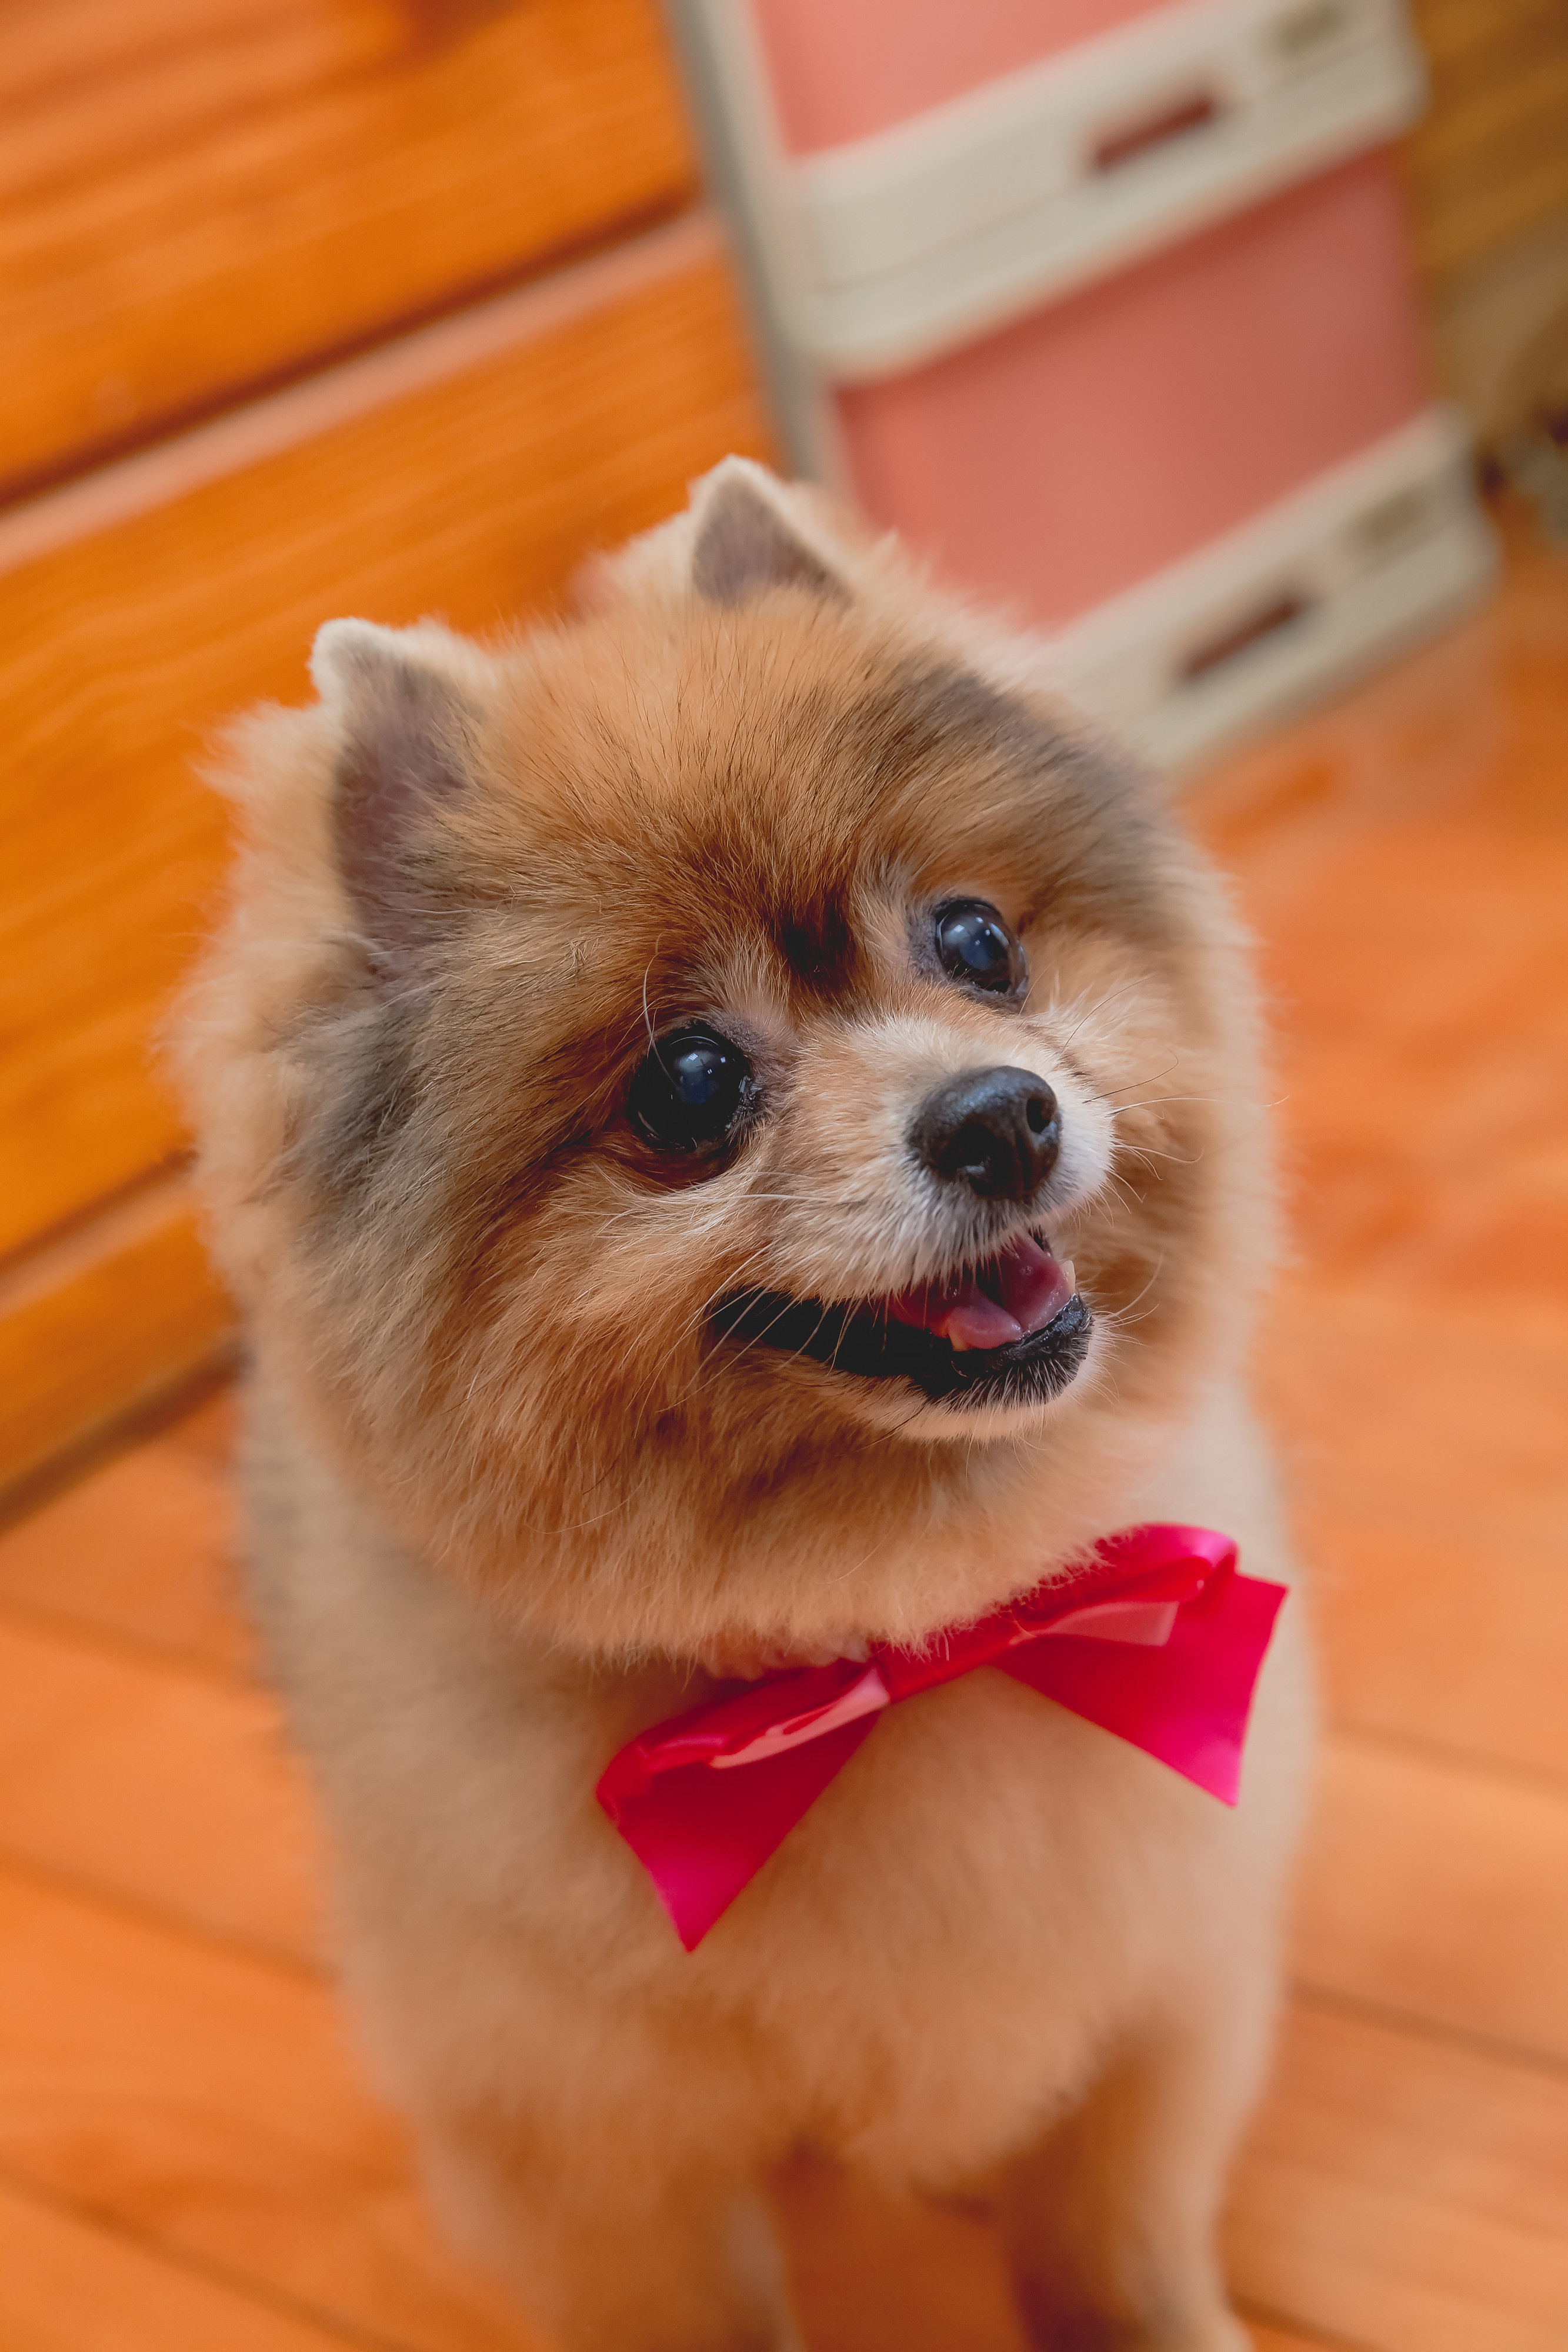 Cool Wallpapers dog, animals, protruding tongue, tongue stuck out, bow, spitz